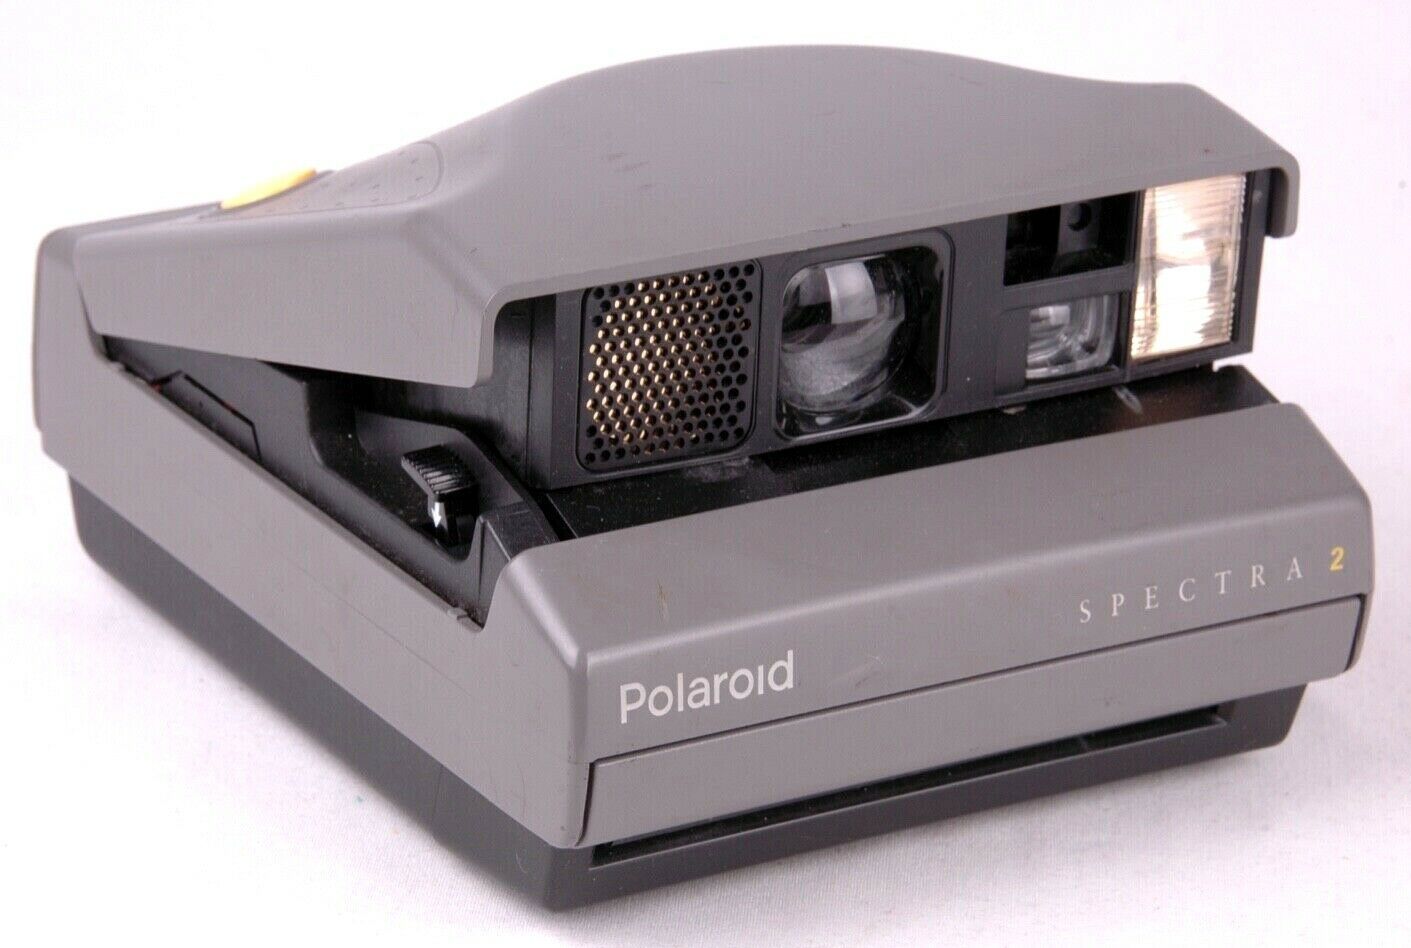 Primary image for Polaroid Spectra 2 Instant Camera Untested